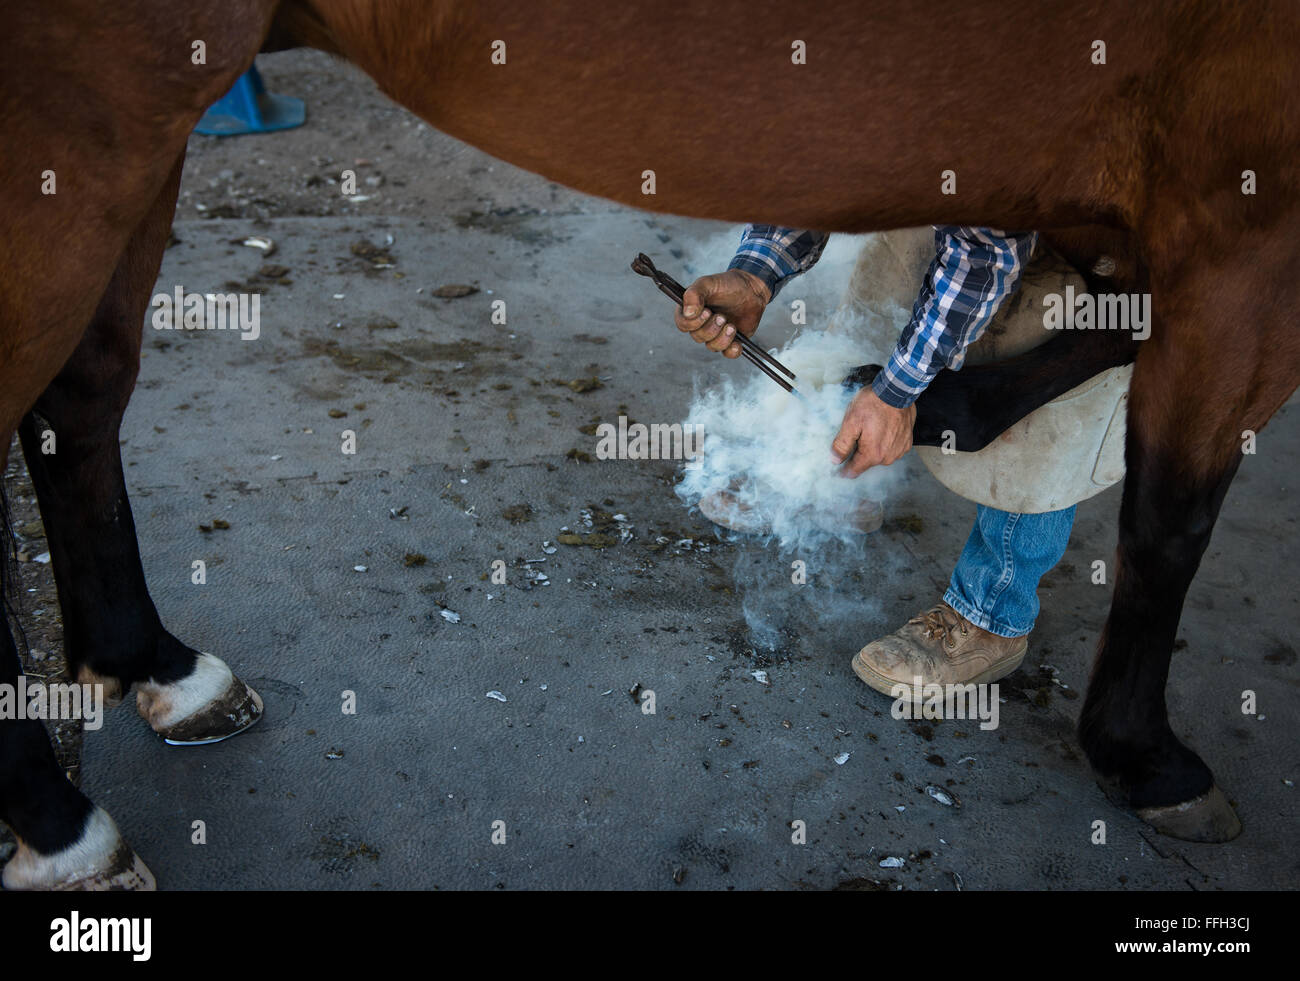 Chris Hume, an independent farrier on the central coast of California, re-shods a horse's hoof with a horseshoe that was heated until it was red-hot. The military horses get re-shodded every six weeks. Stock Photo